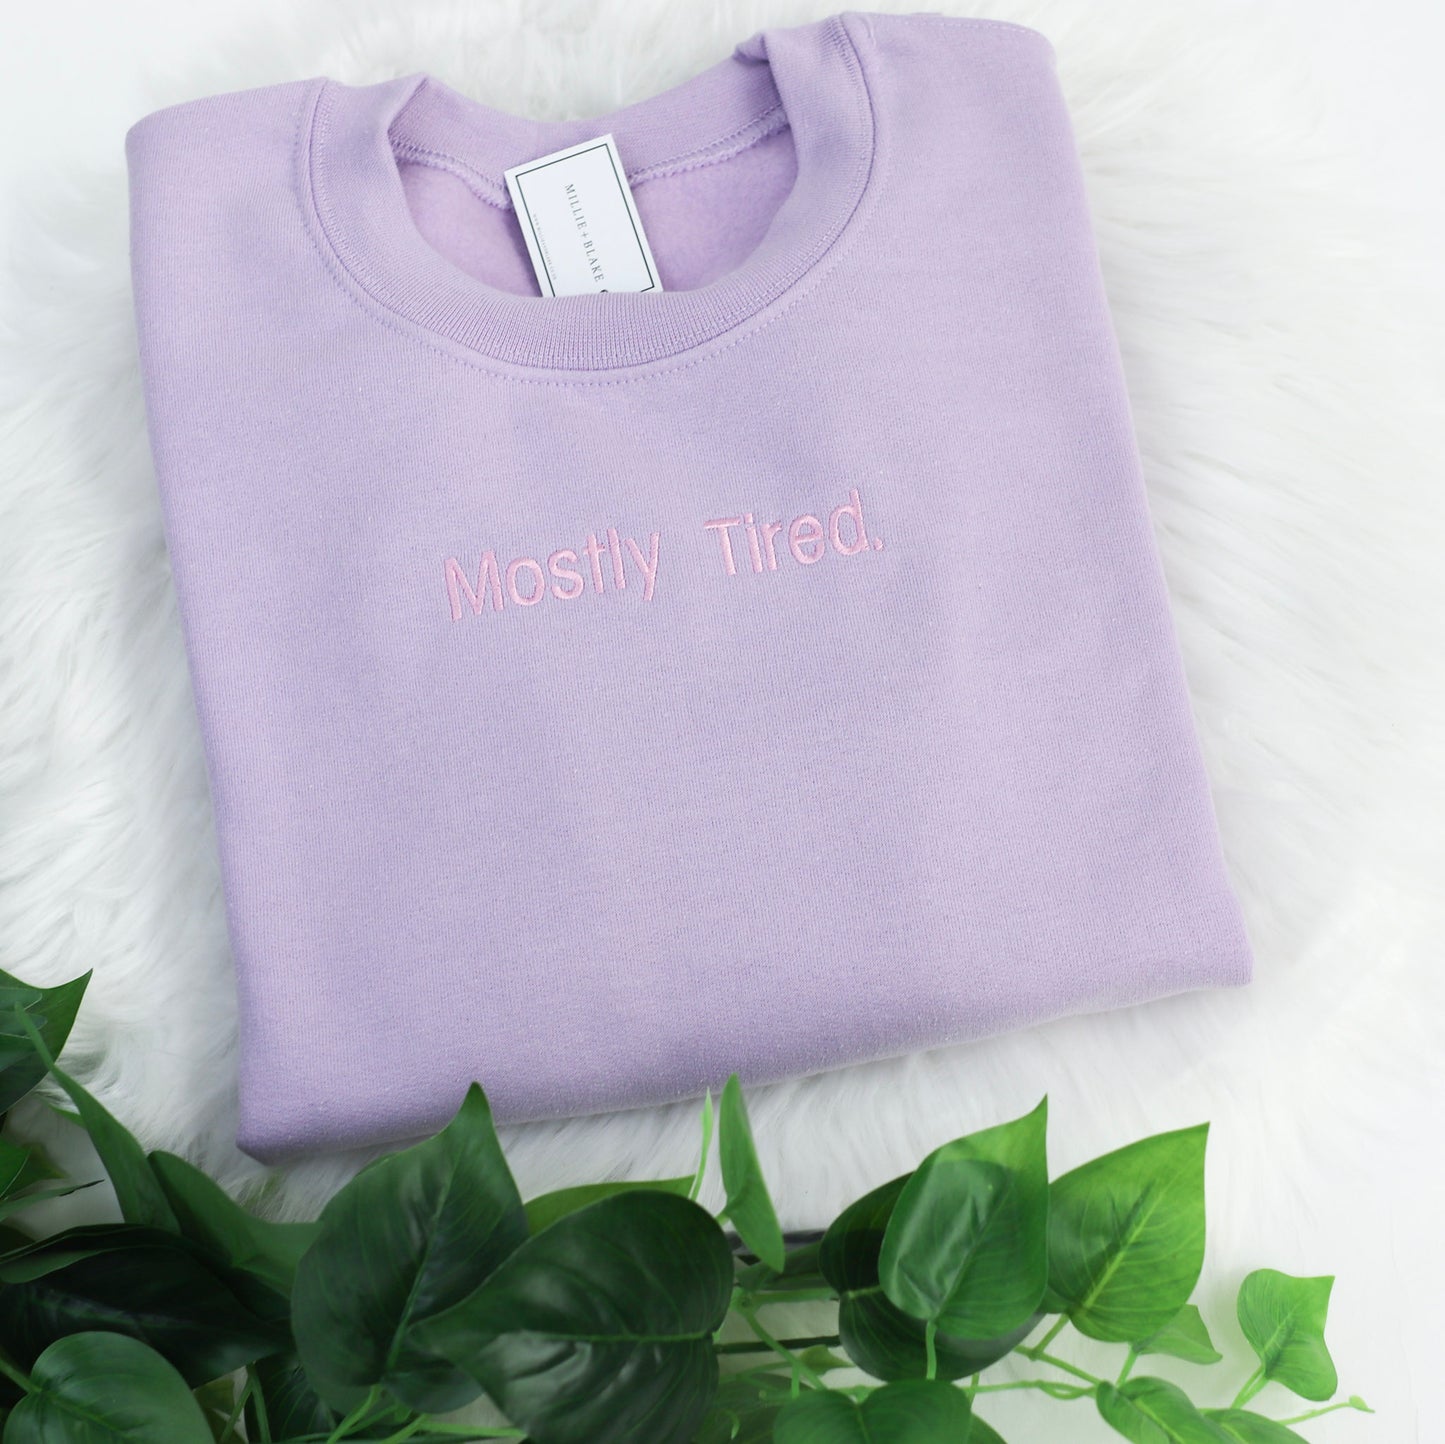 Mostly Tired Embroidered Unisex Adults Sweatshirt